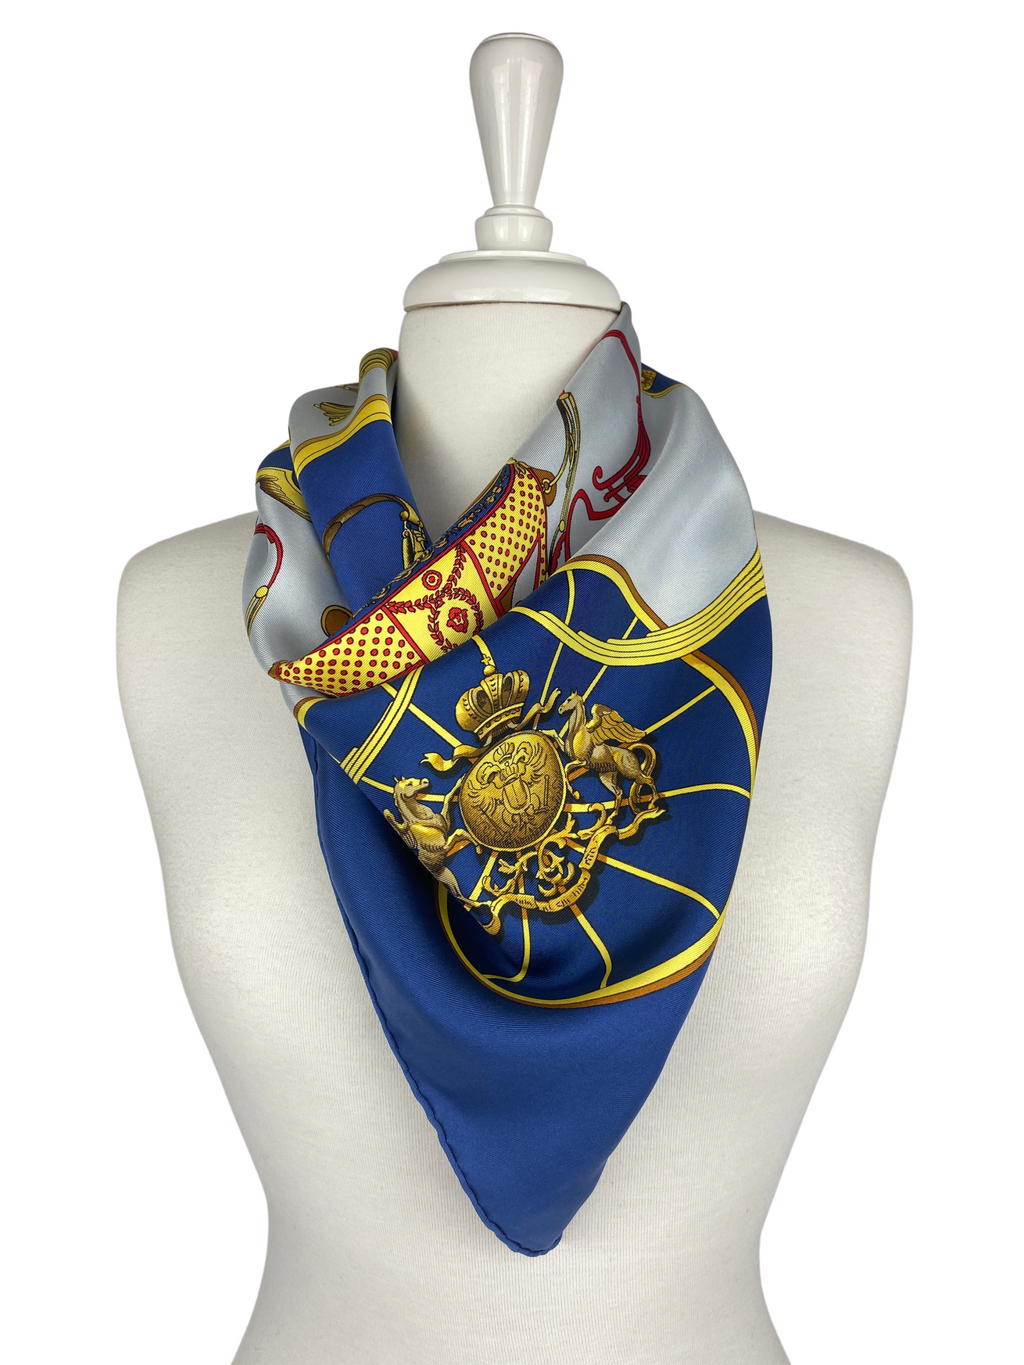 HERMÉS - SPRINGS SILK SCARF IN BLUE BY PHILIPPE LEDOUX  - 90CM